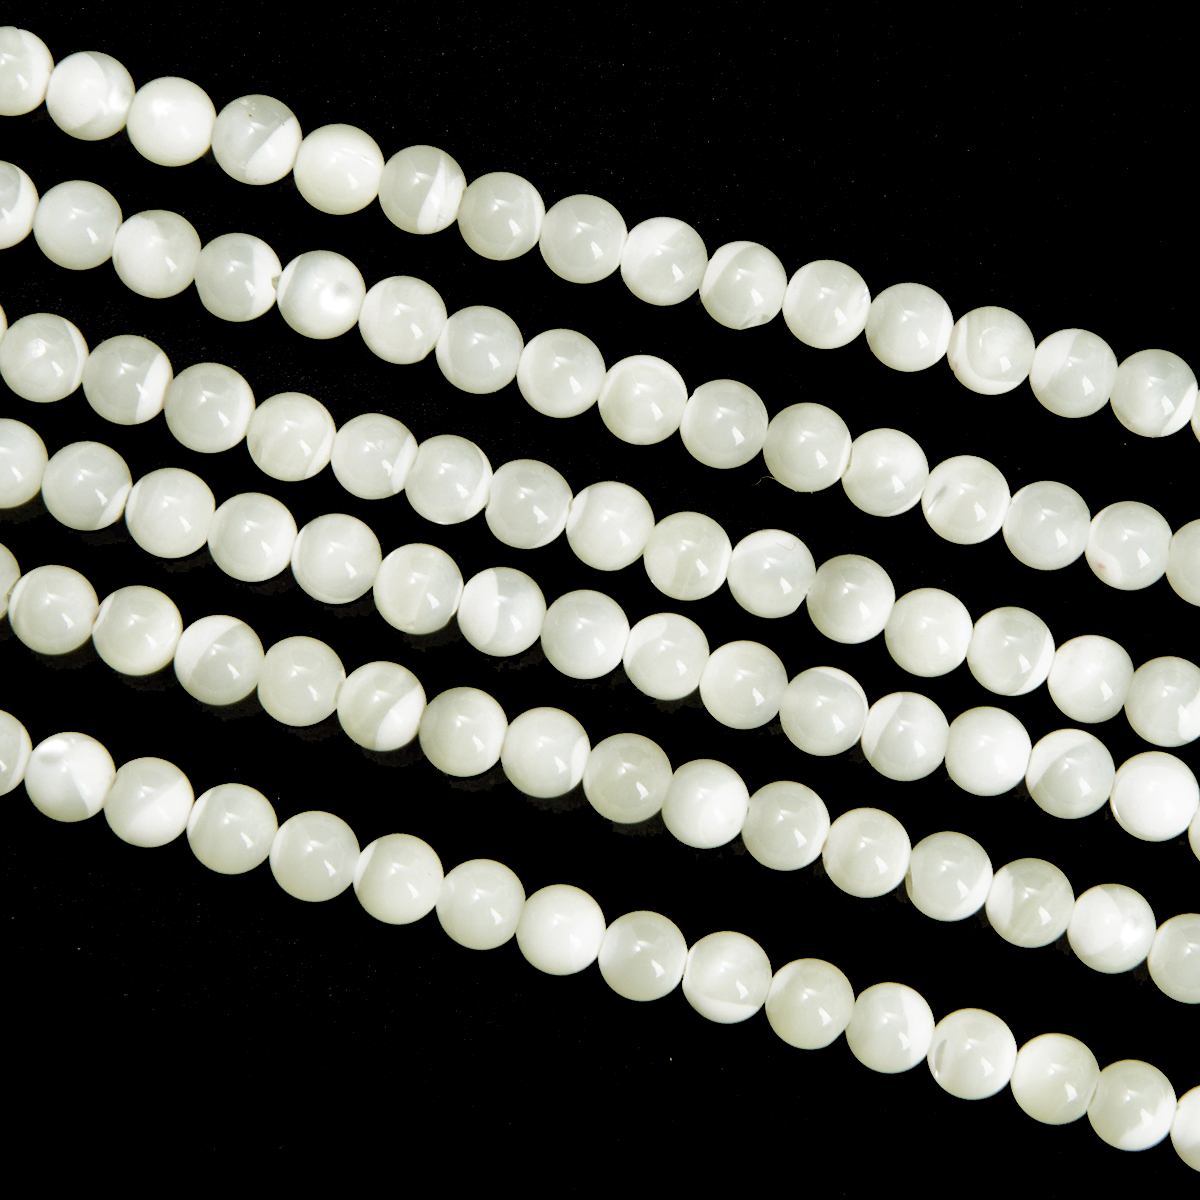 Mother-of-pearl A 6mm pearls on string